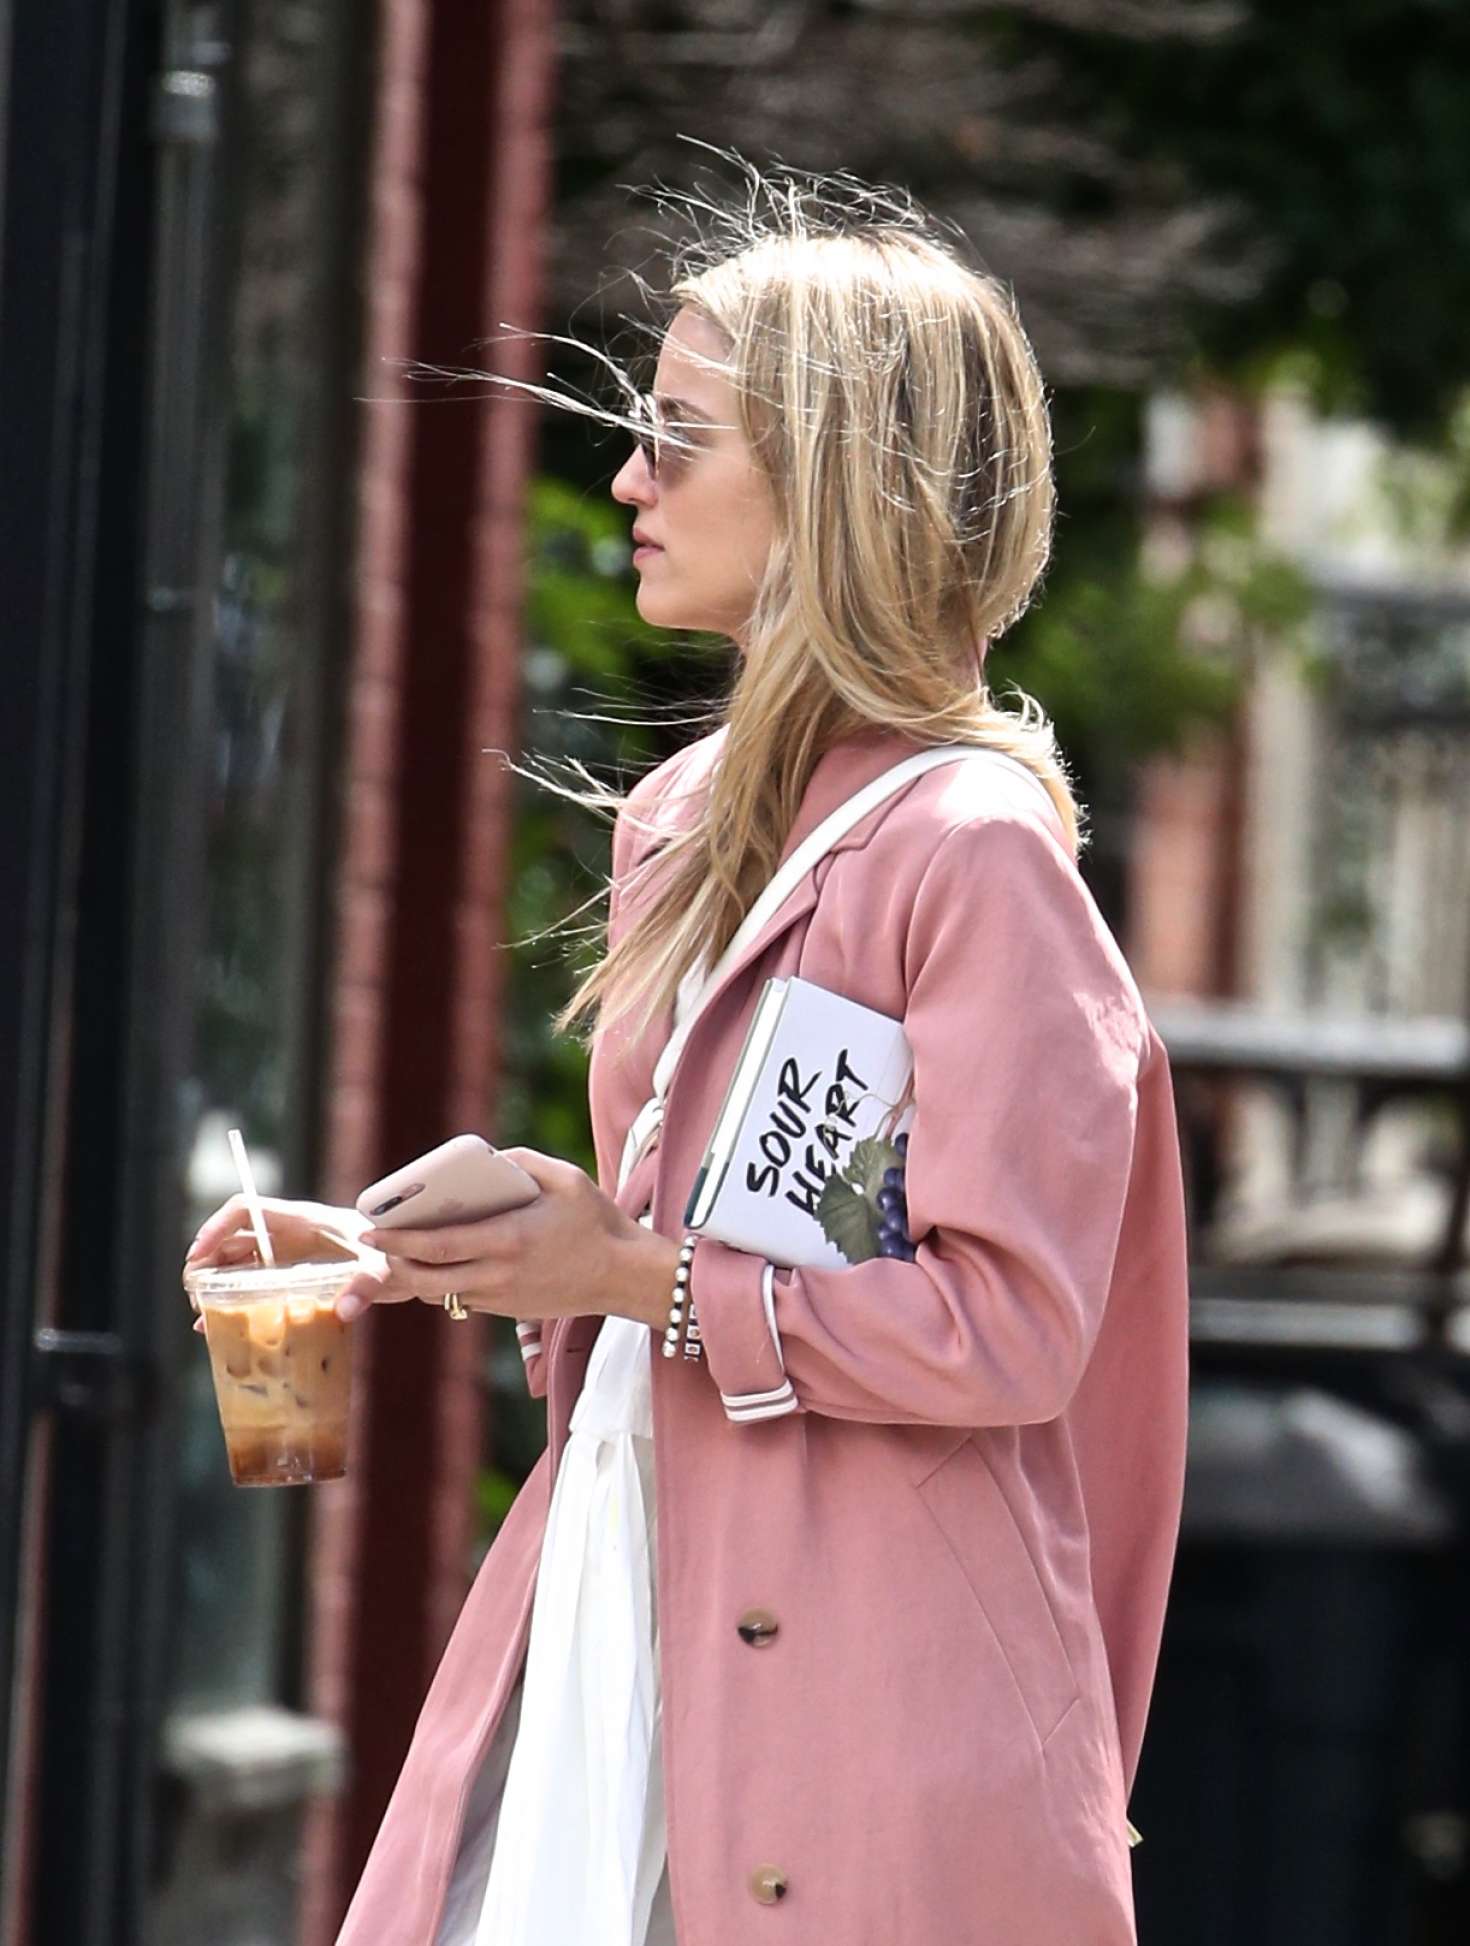 Dianna Agron â€“ Out in NYC